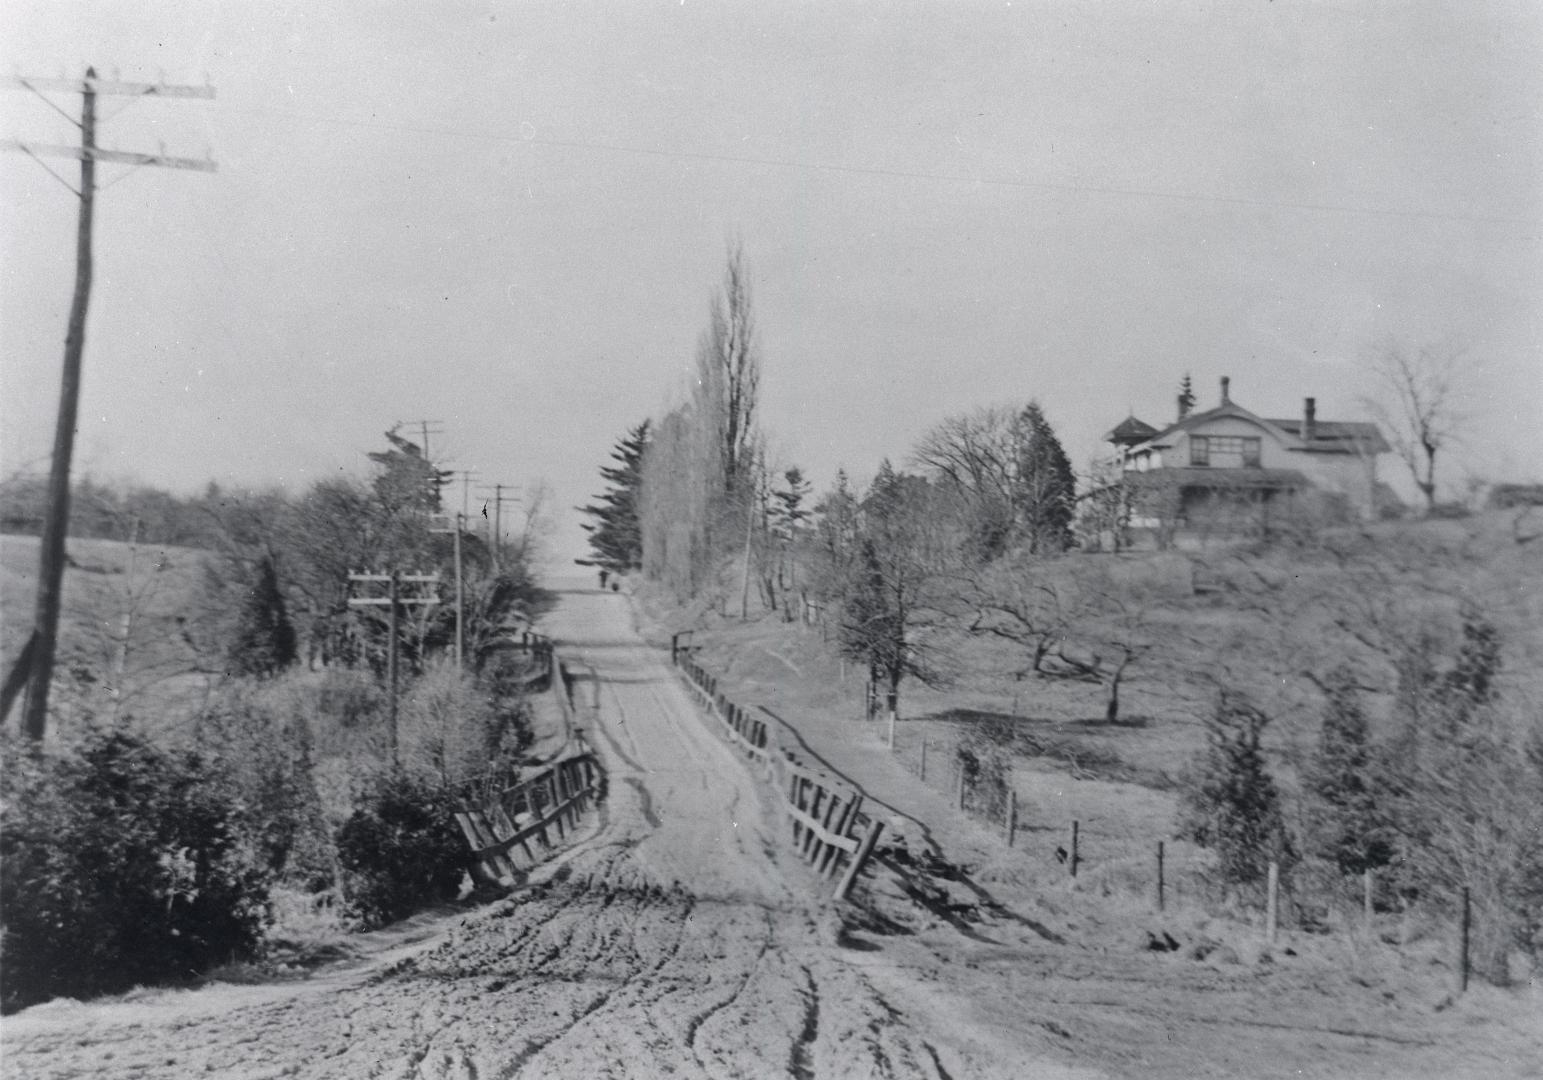 Bayview Avenue, looking north from Eglinton Avenue East. Image shows an unpaved road going up a ...